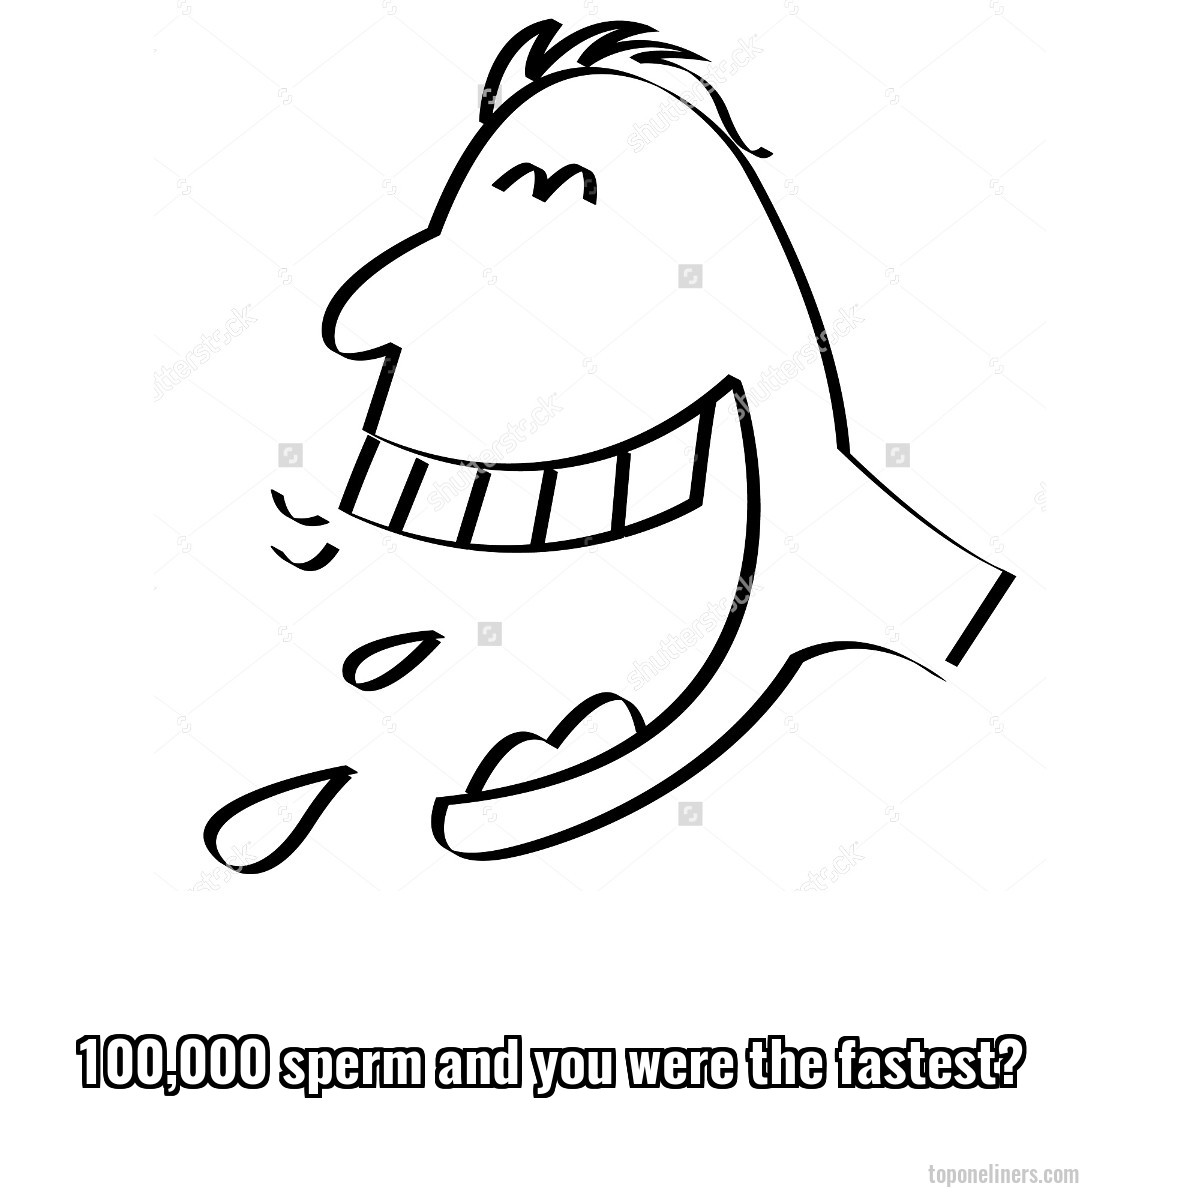 100,000 sperm and you were the fastest?
